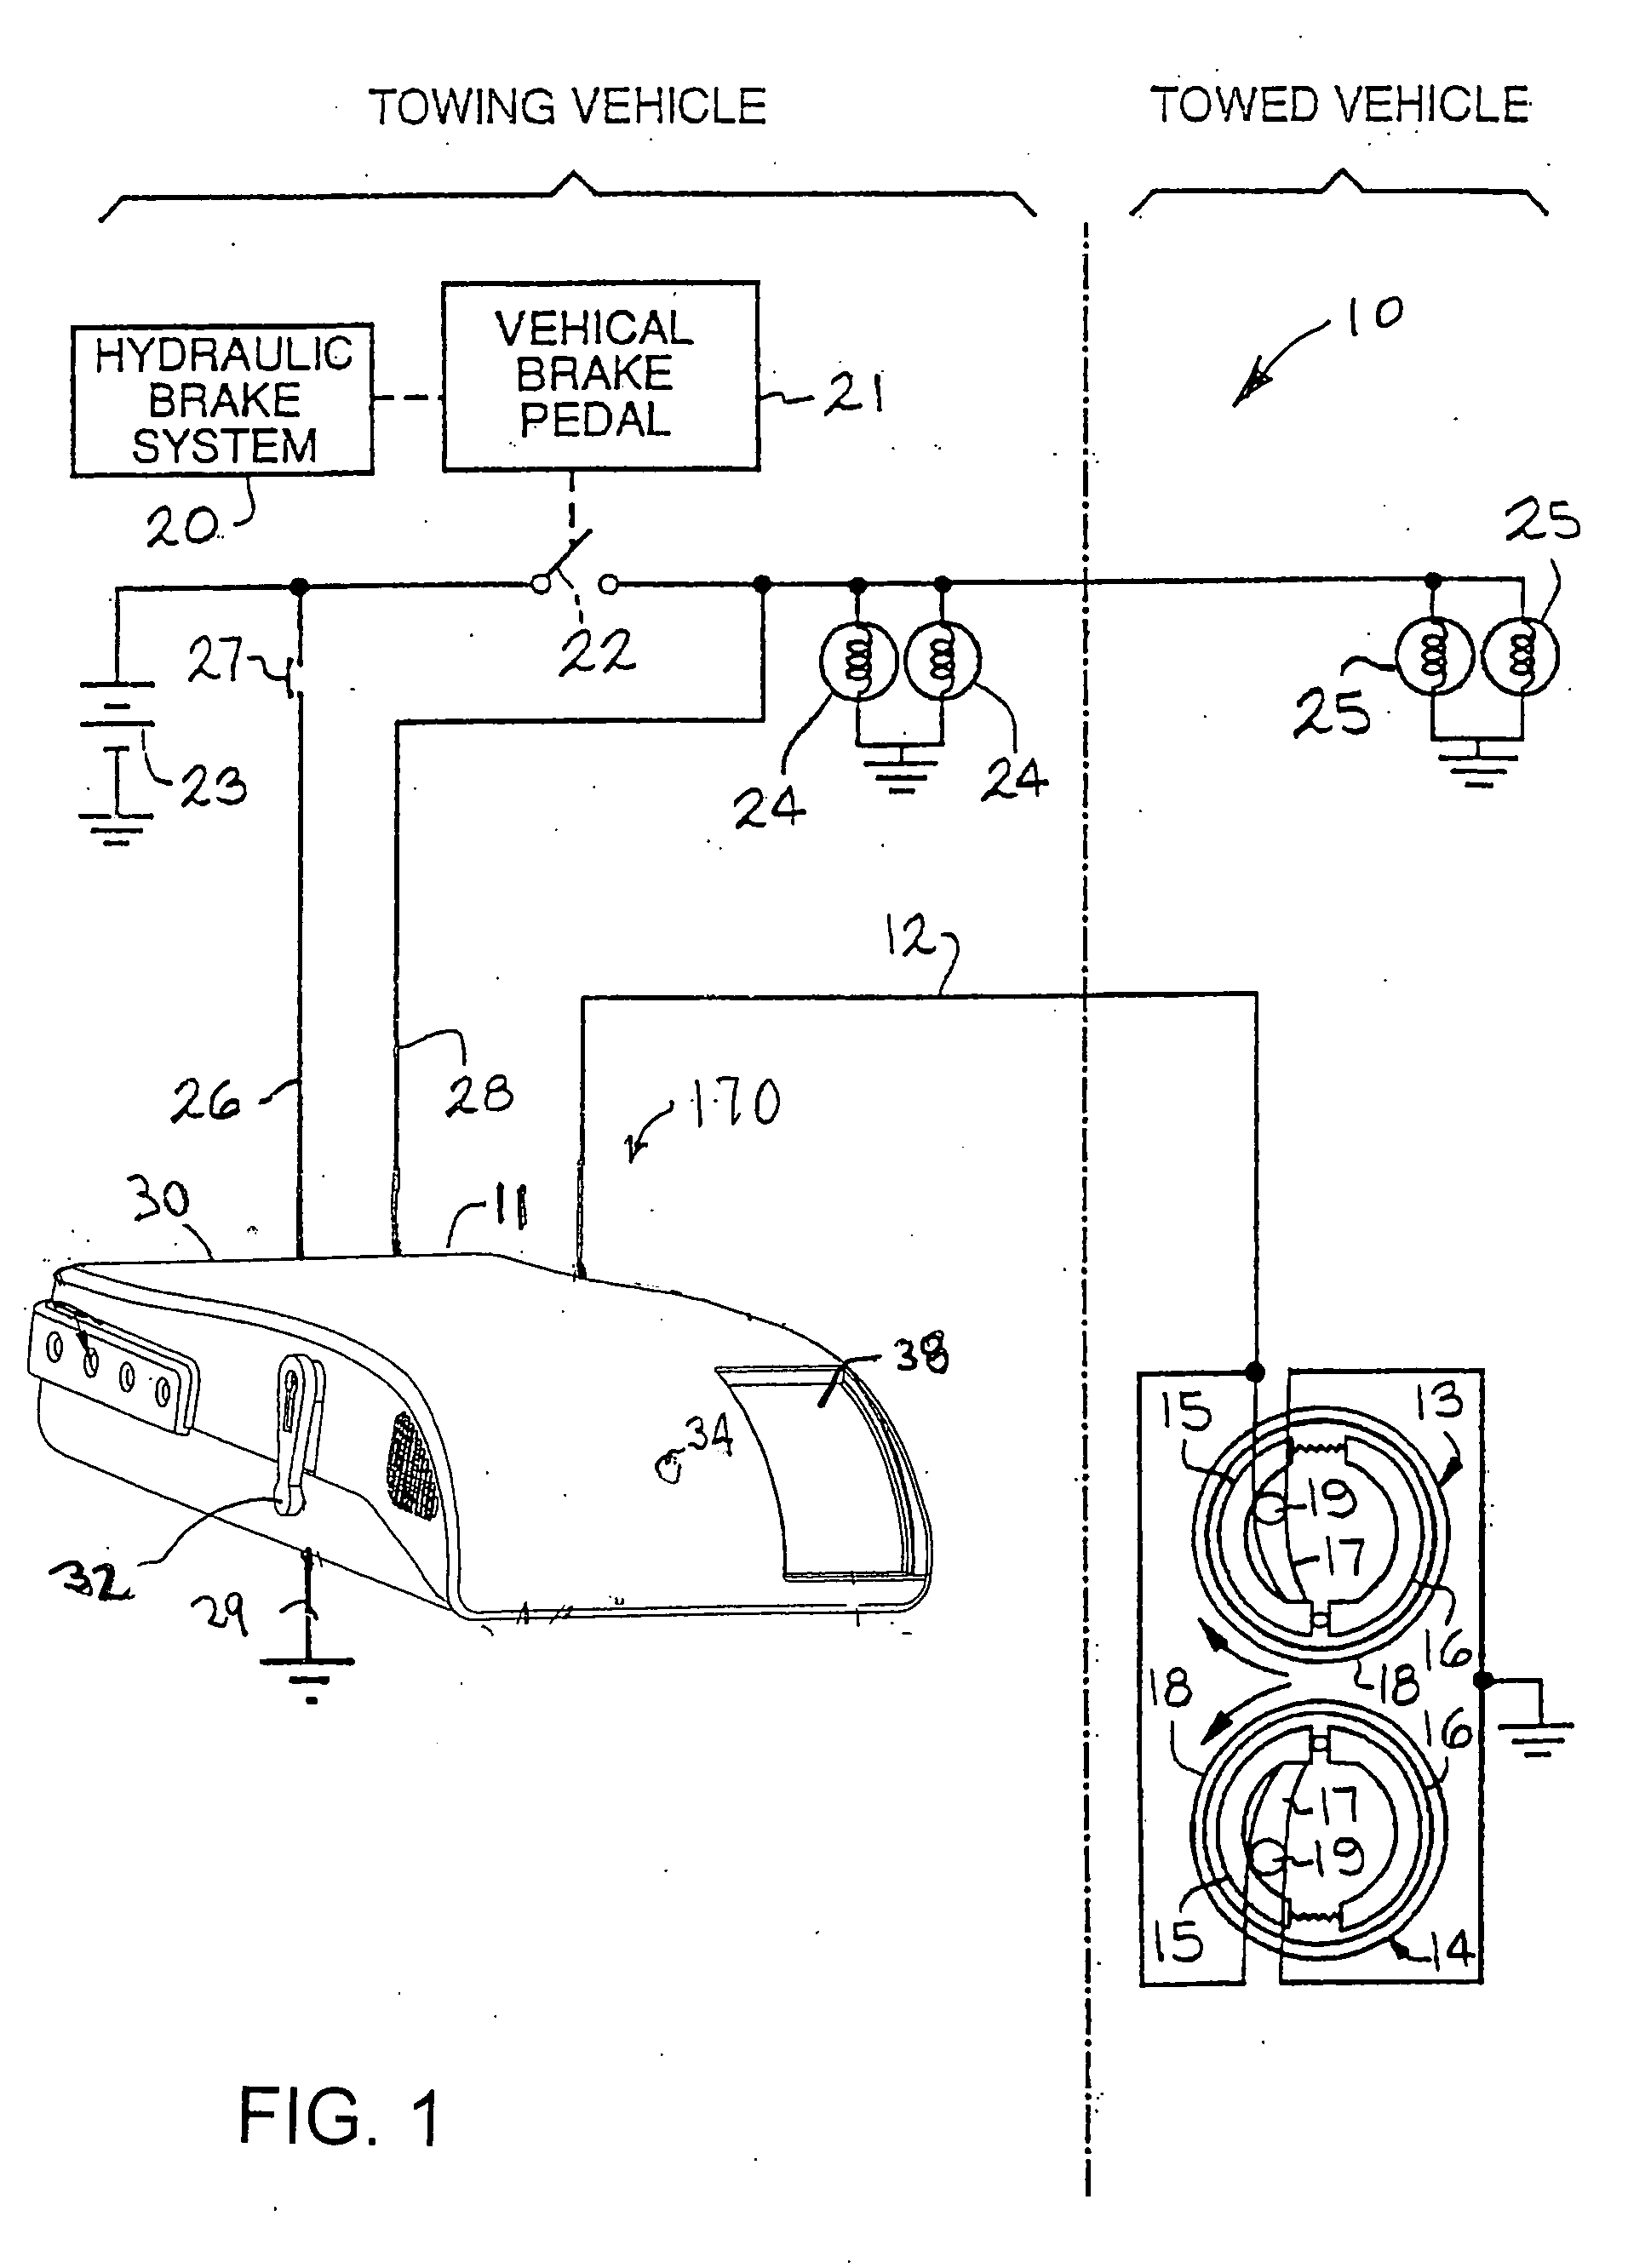 Electric trailer brake controller with an adjustable accelerometer mounting